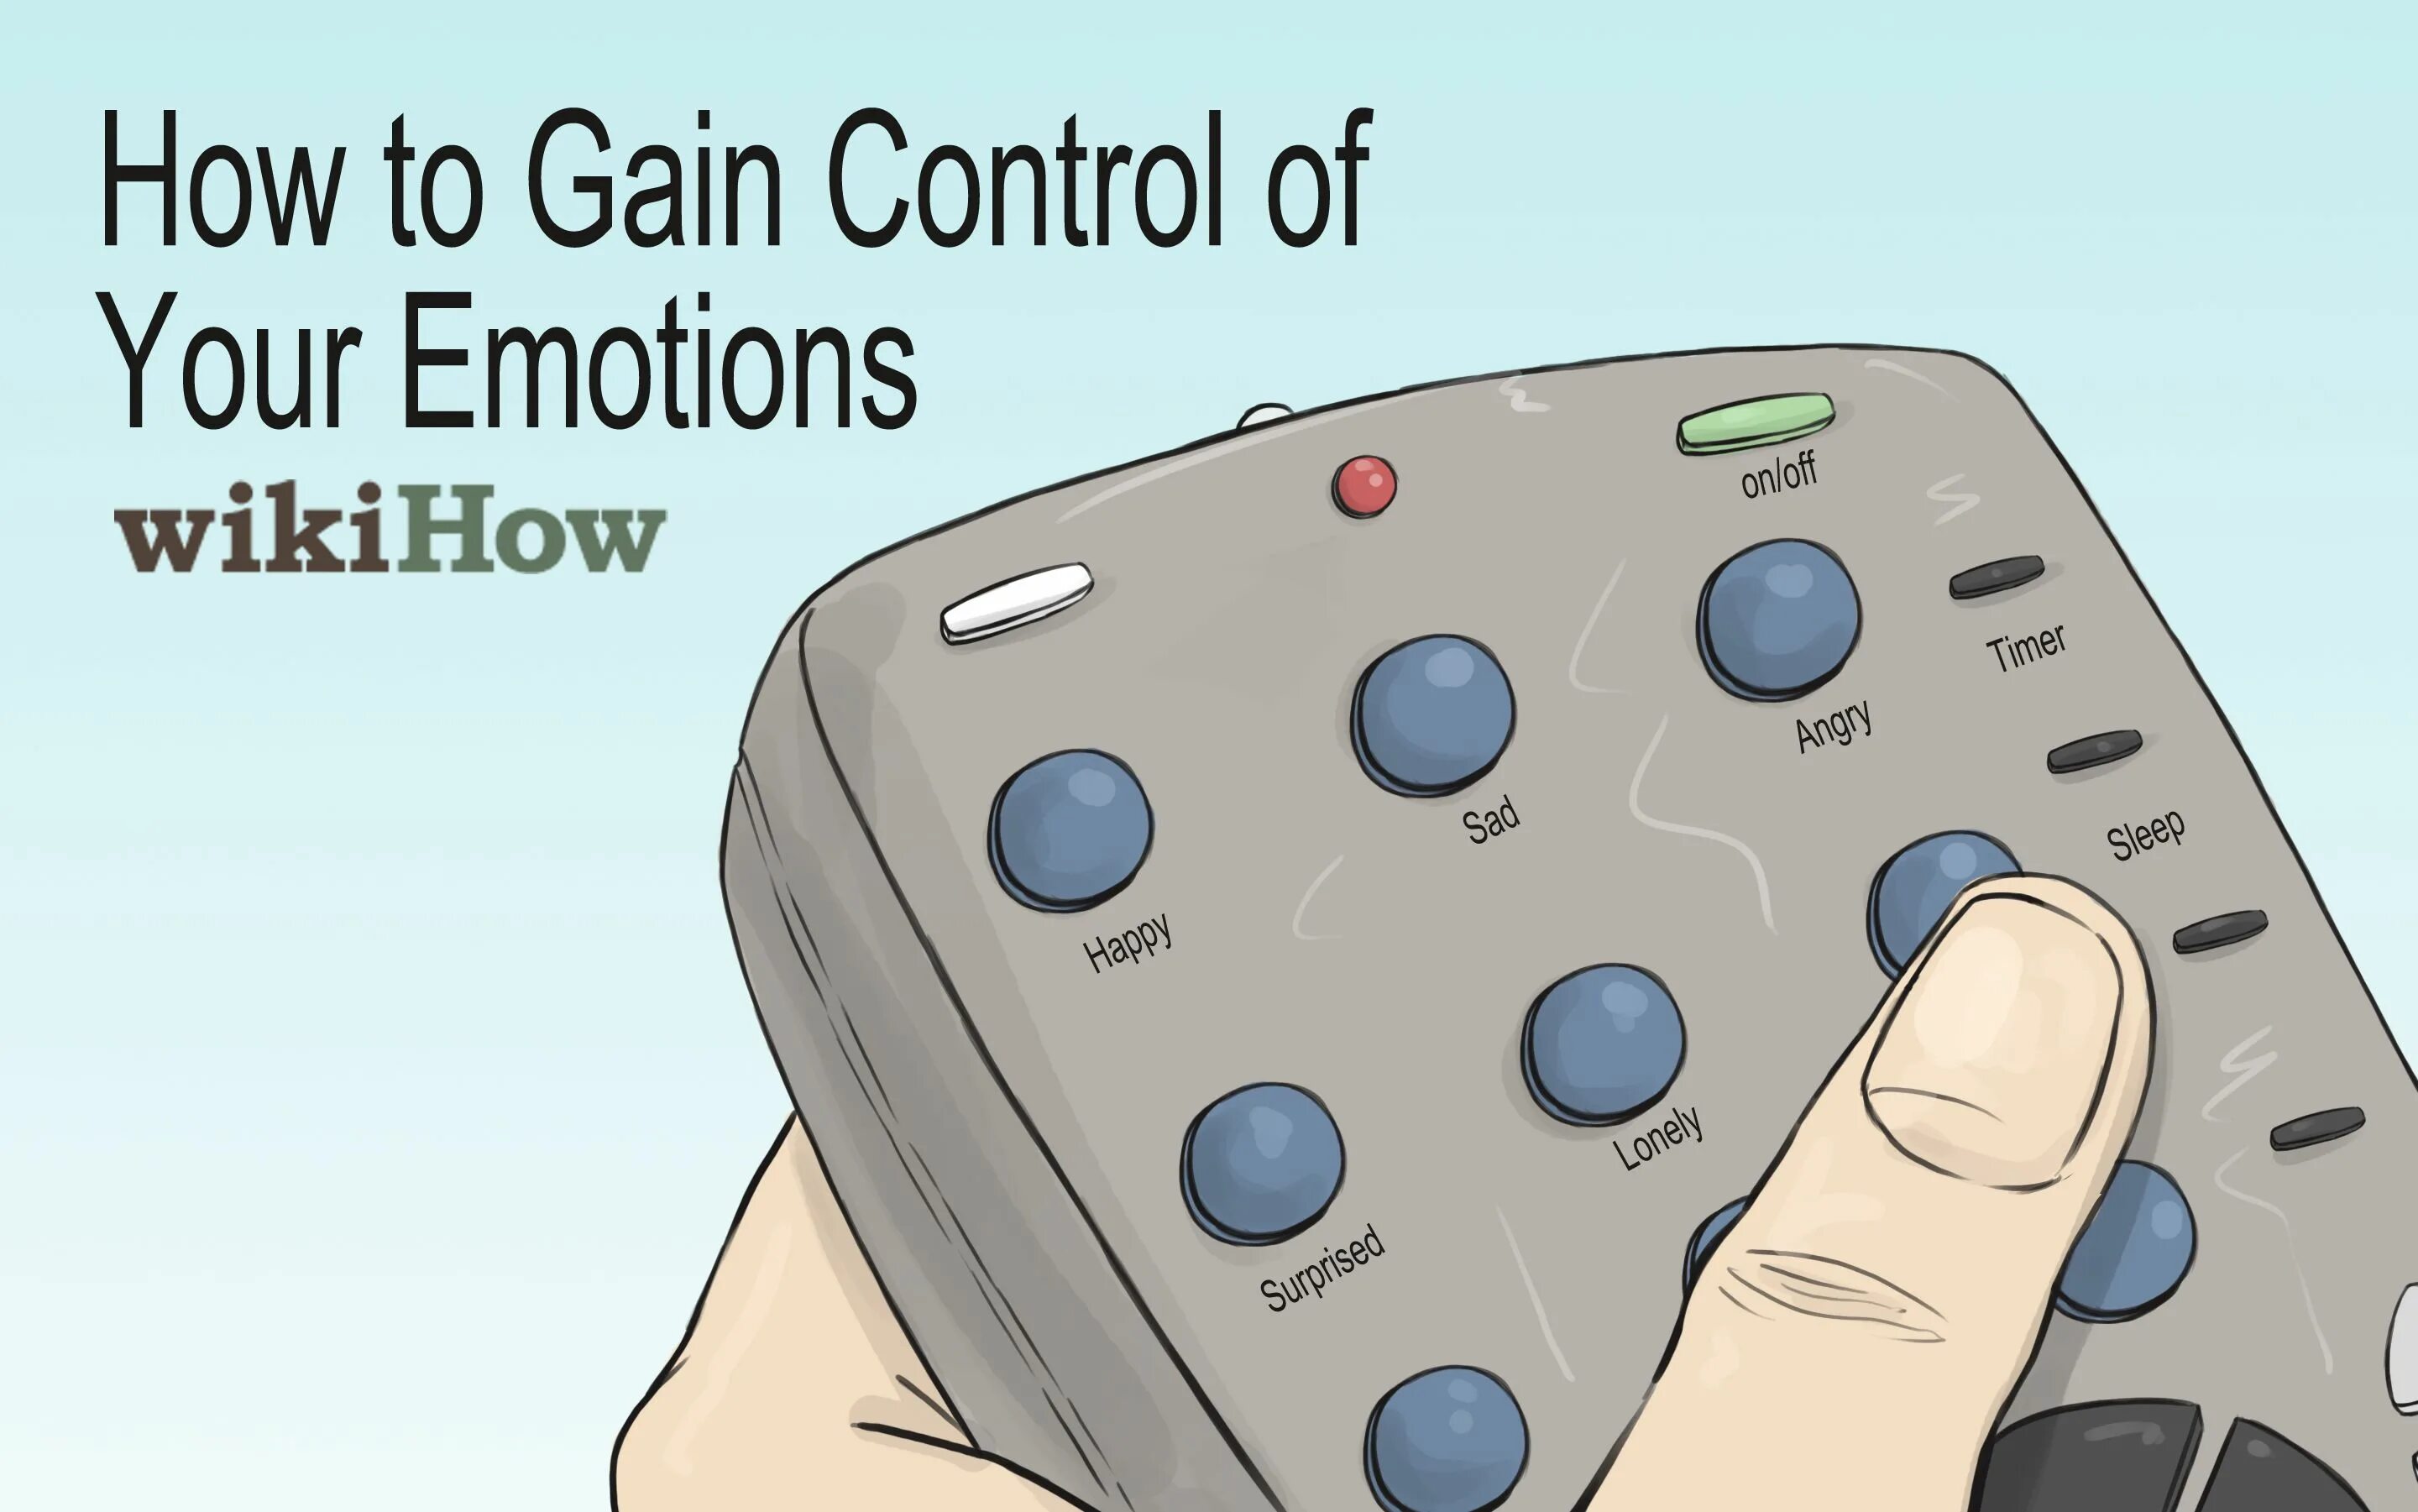 How to Control your emotions. Control your emotions avto. Что значит gain Control.